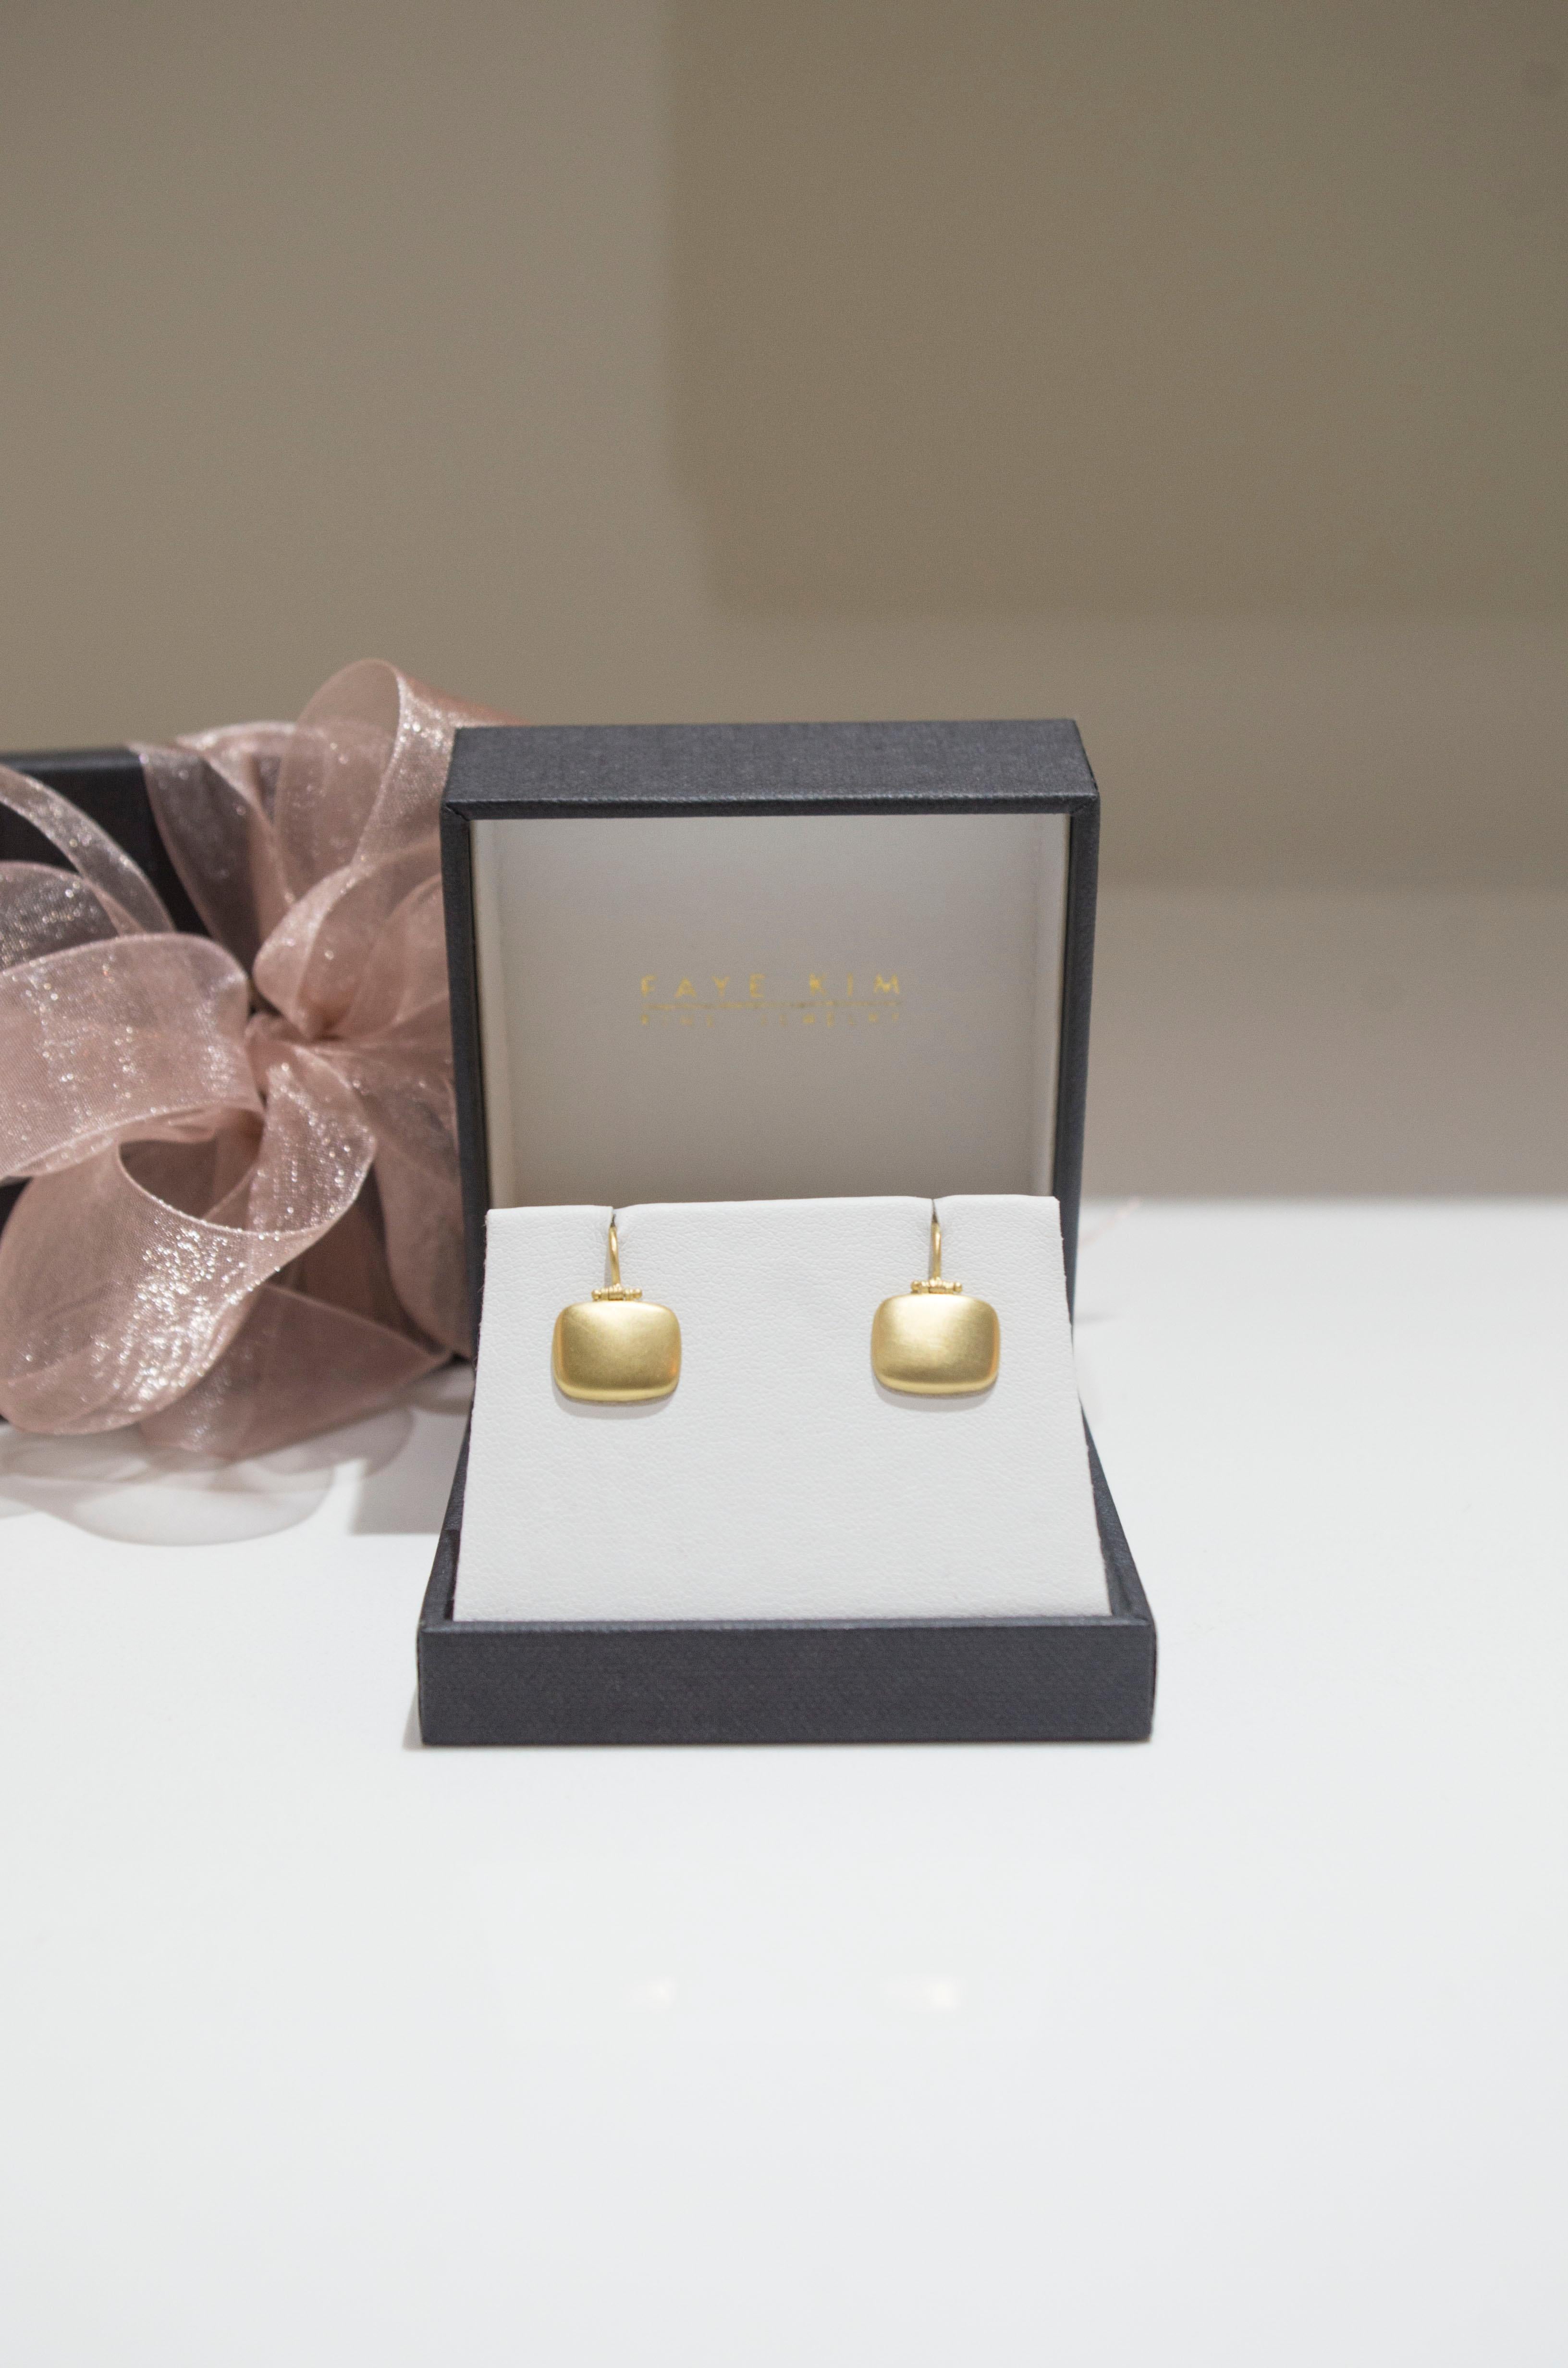 It's all in the details. Faye Kim's signature 18K green gold earrings are finished with  hinged ear wires to allow for movement. Certain to turn heads with its clean, sleek, and modern design! Matte-finished and perfect for everyday
Earring length